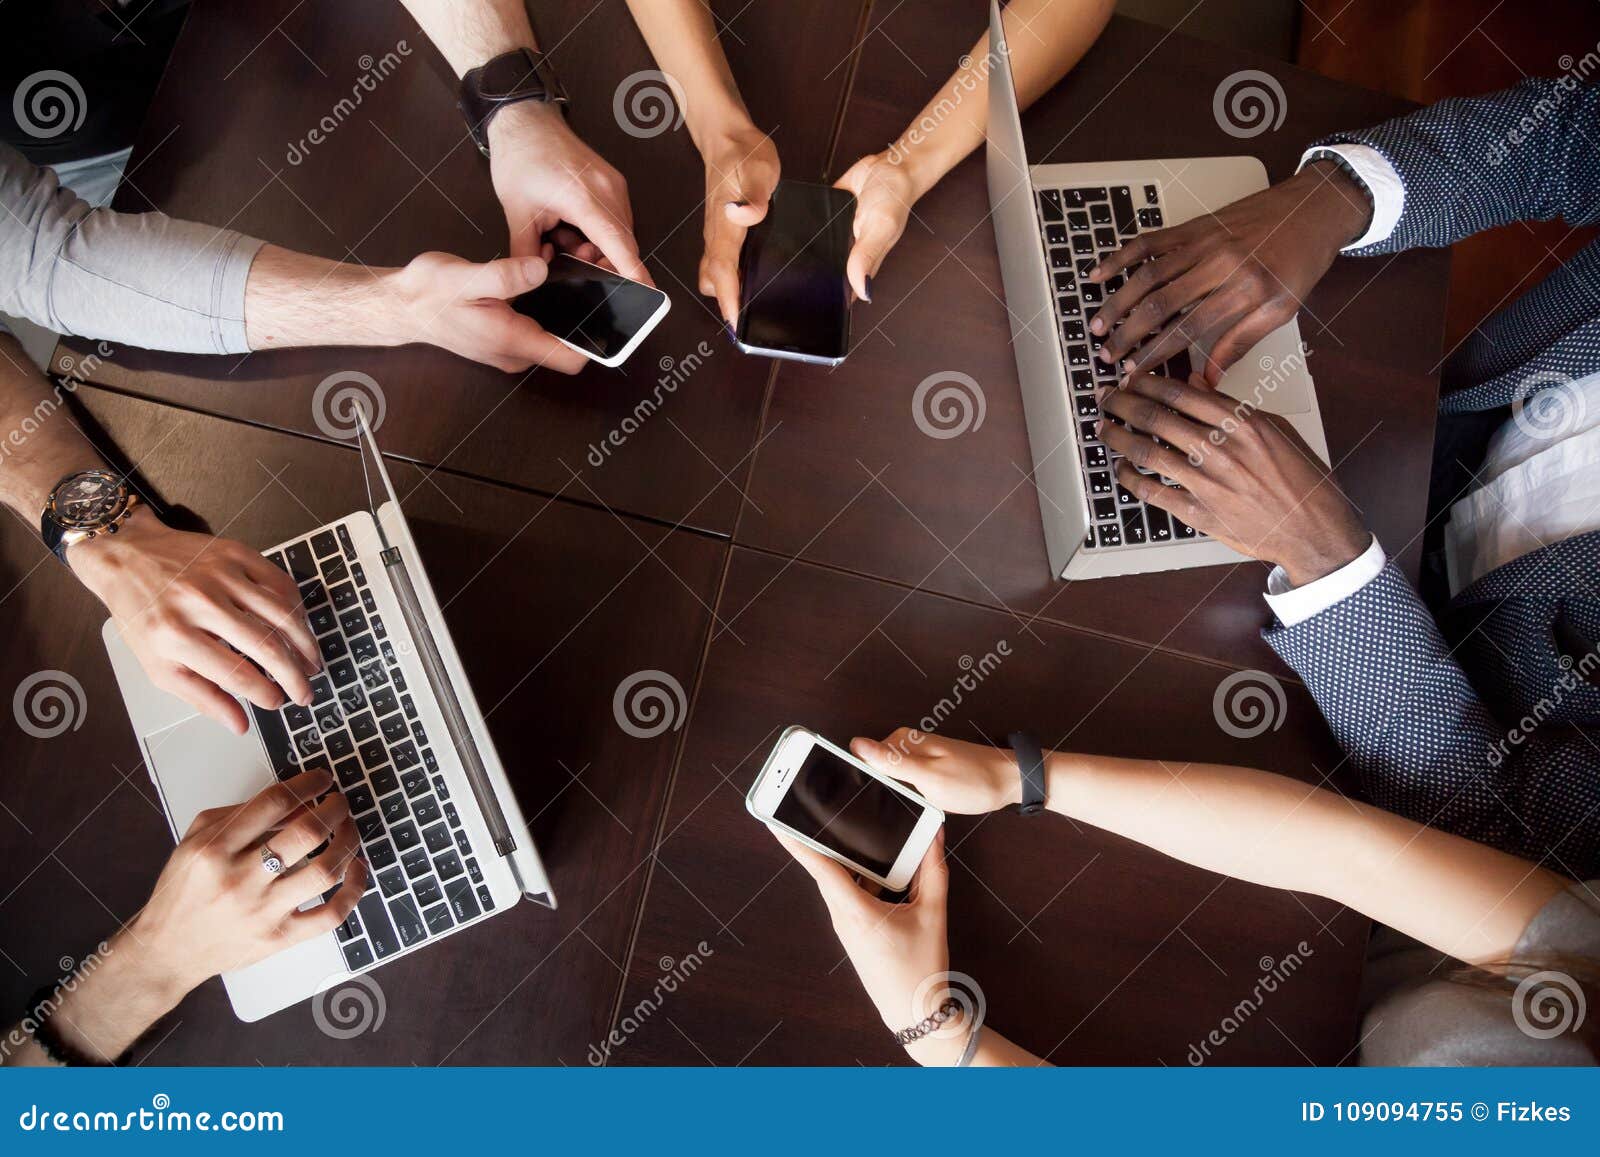 diverse multiracial people using laptops smartphones on table, t